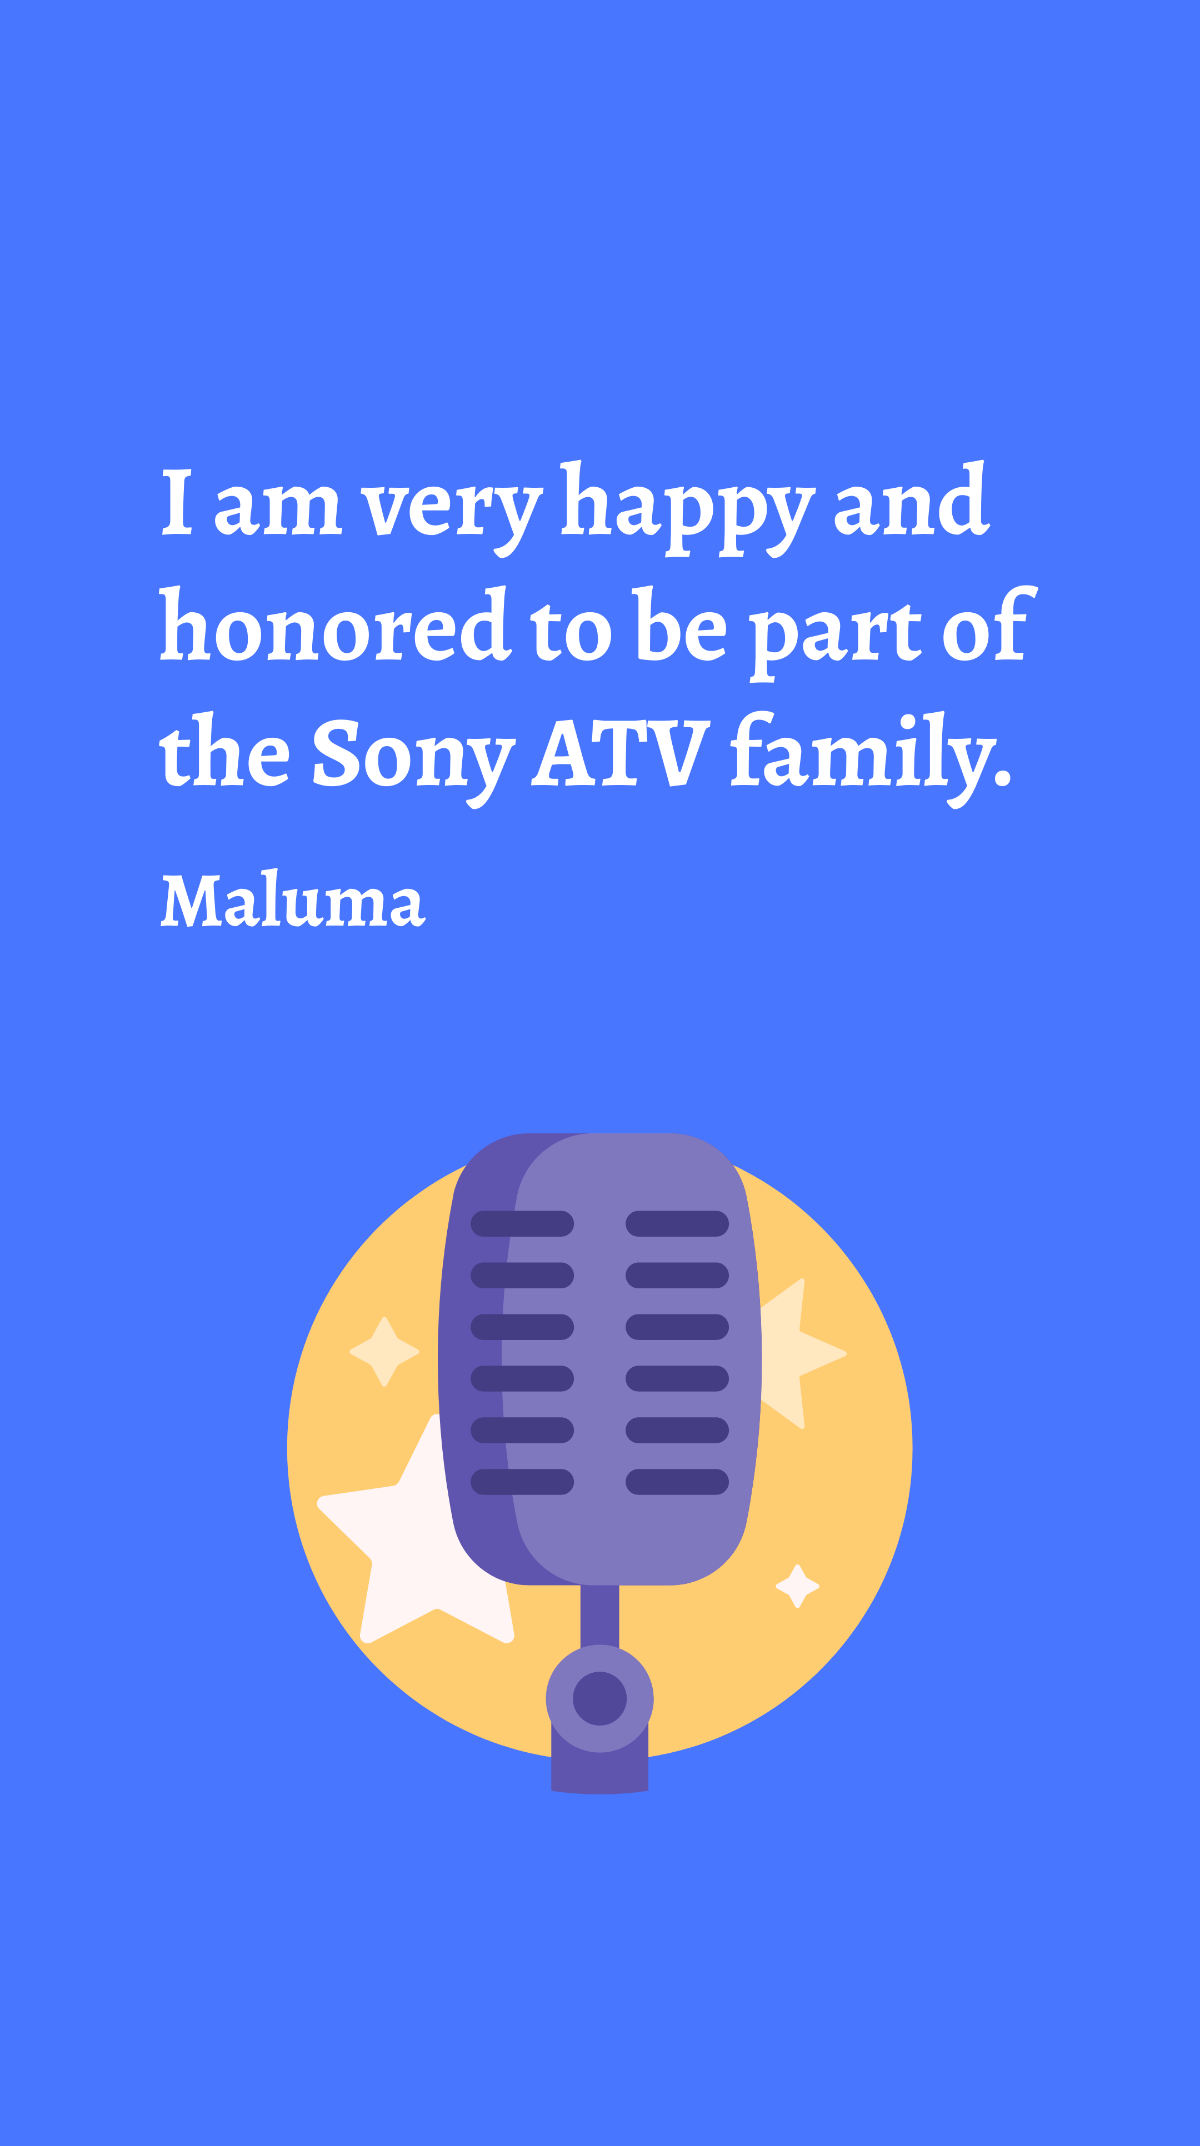 Free Maluma - I am very happy and honored to be part of the Sony ATV family. Template